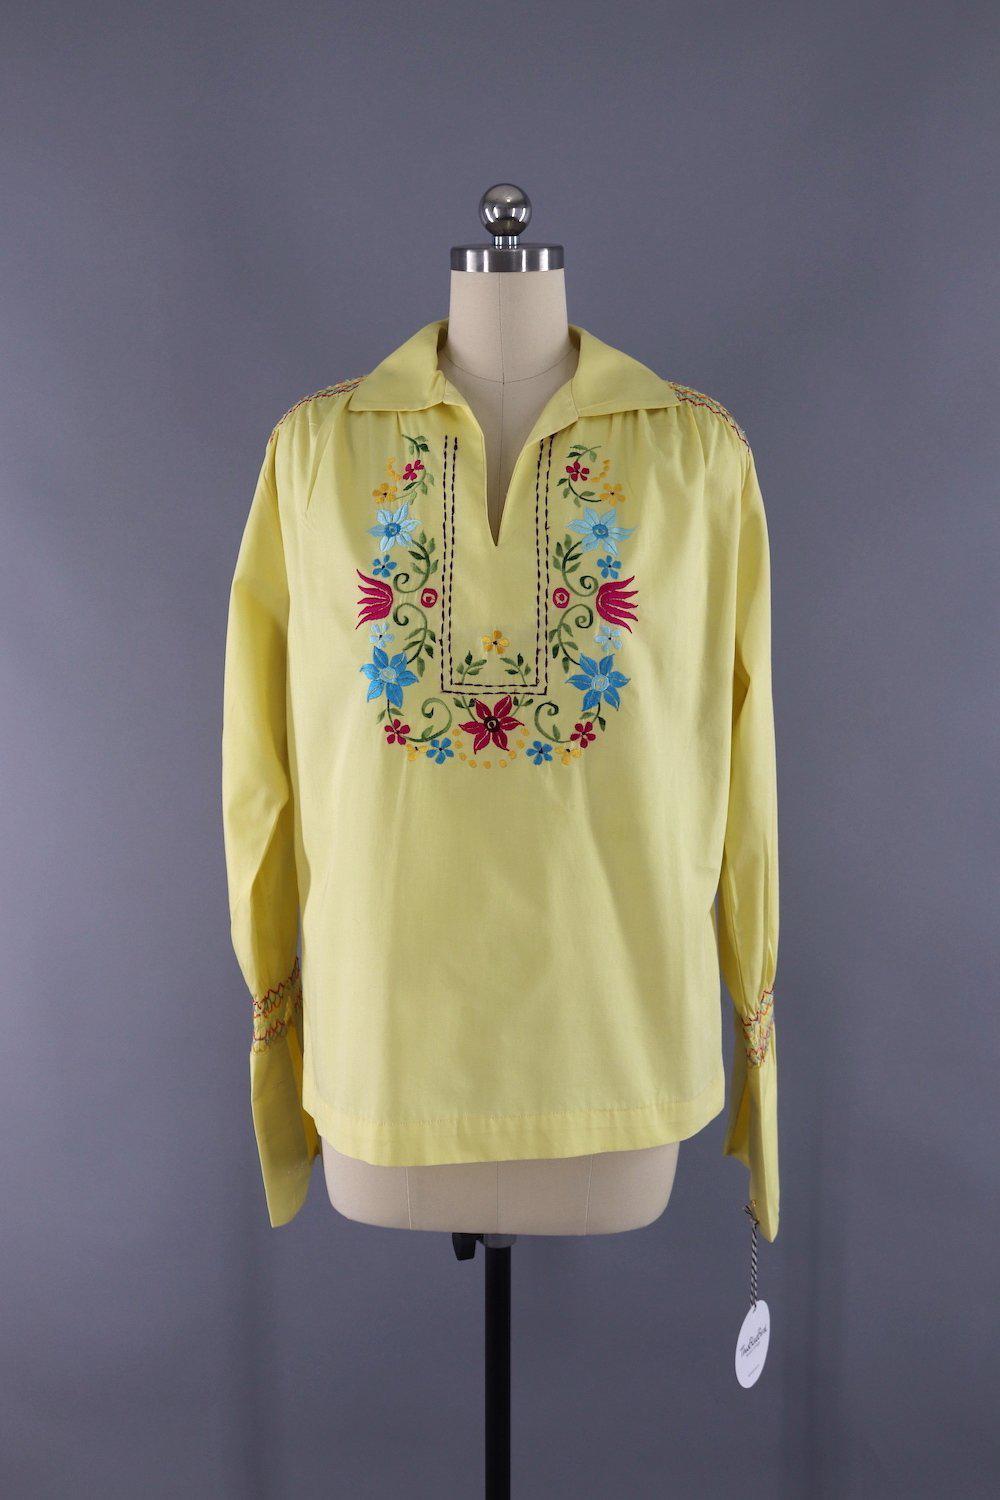 Vintage Yellow Floral Embroidered Tunic Blouse - ThisBlueBird